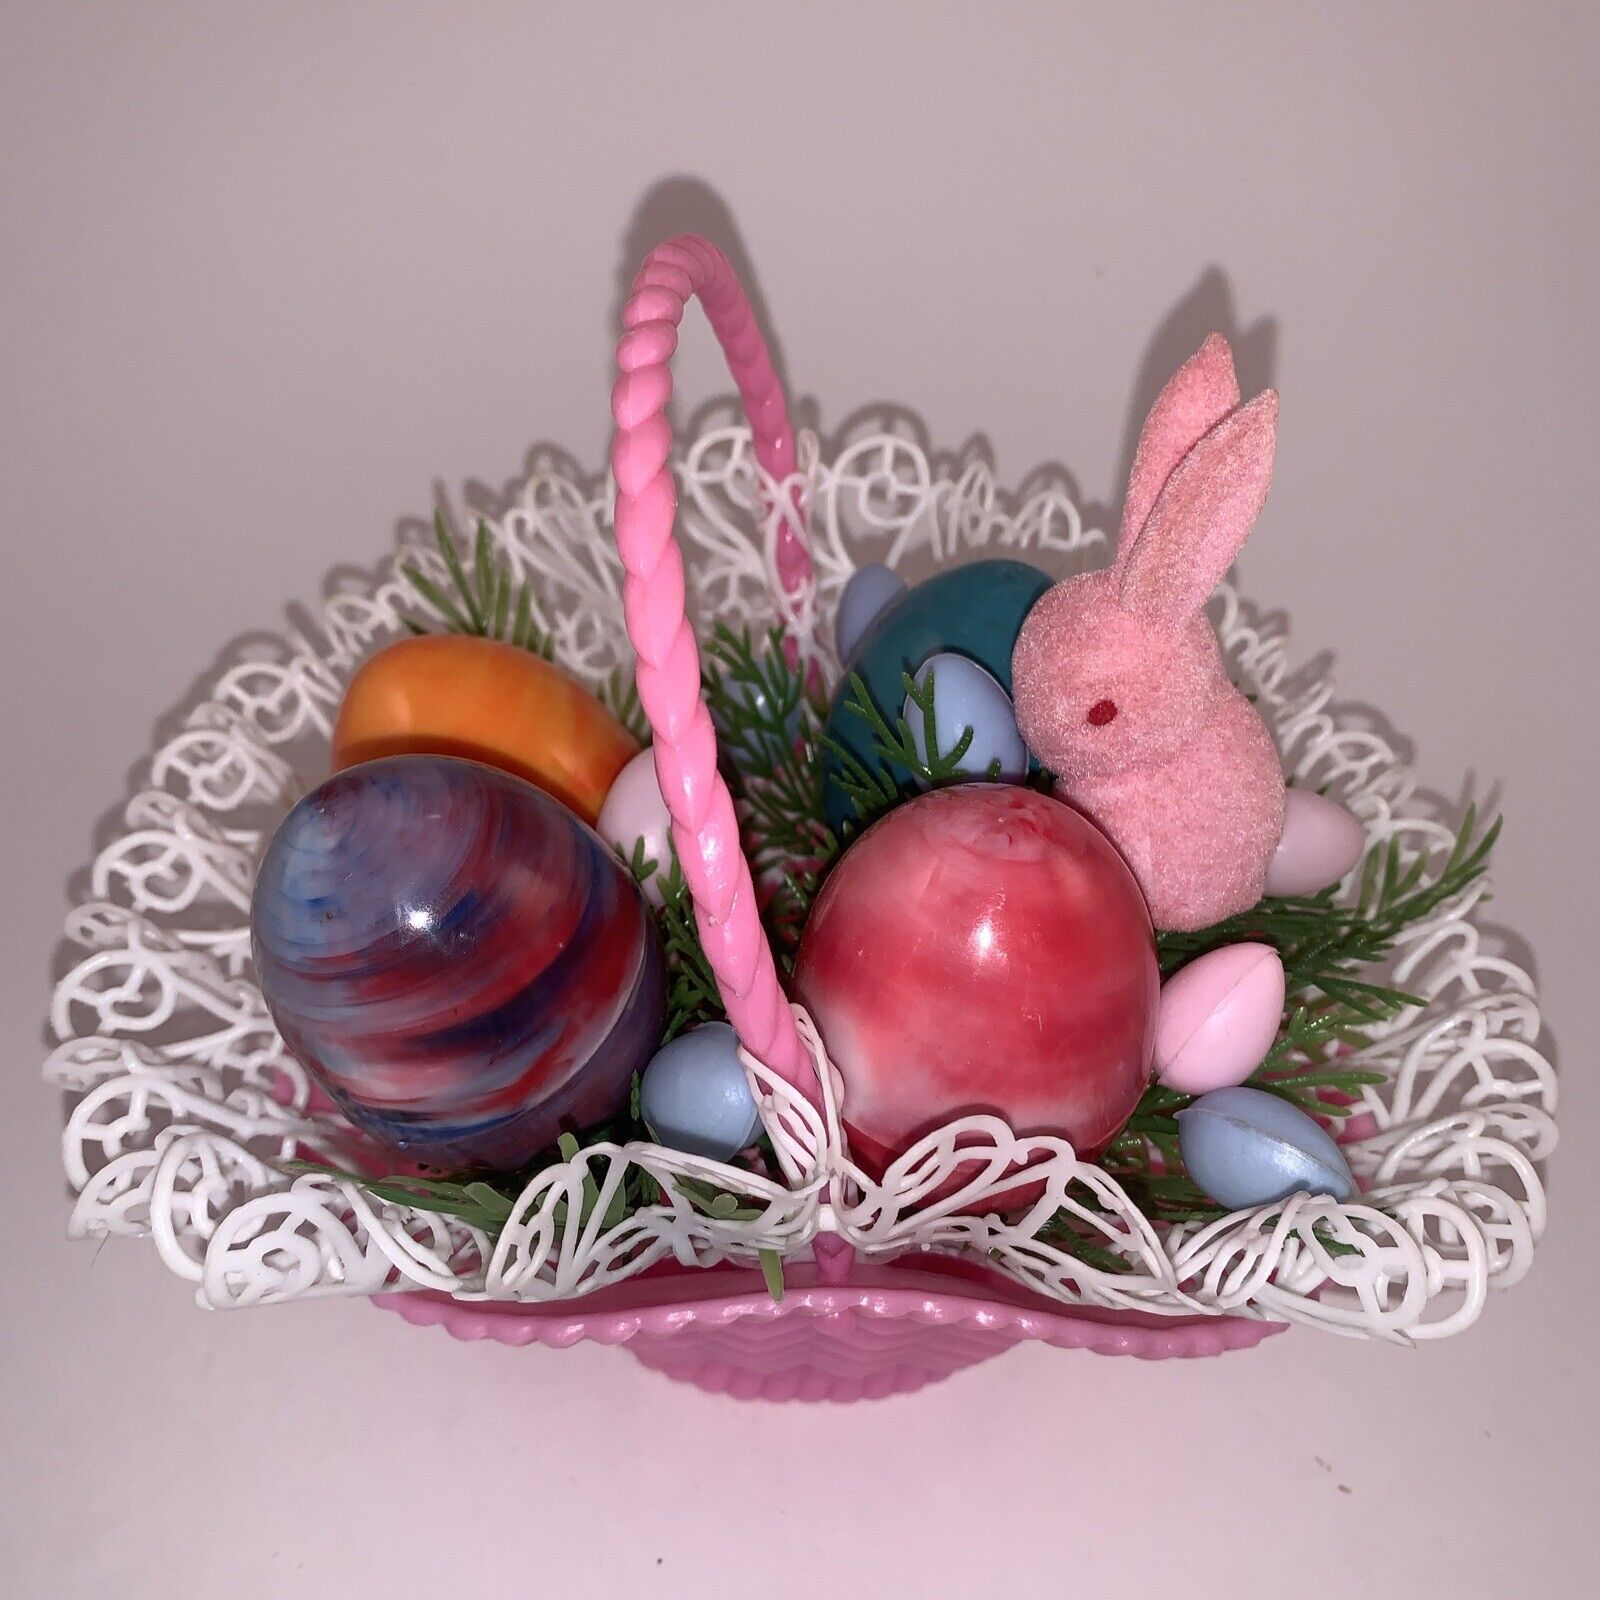 Vintage Easter Basket Scene Plastic Lace Bunny Eggs 7” Kitsch Collectible